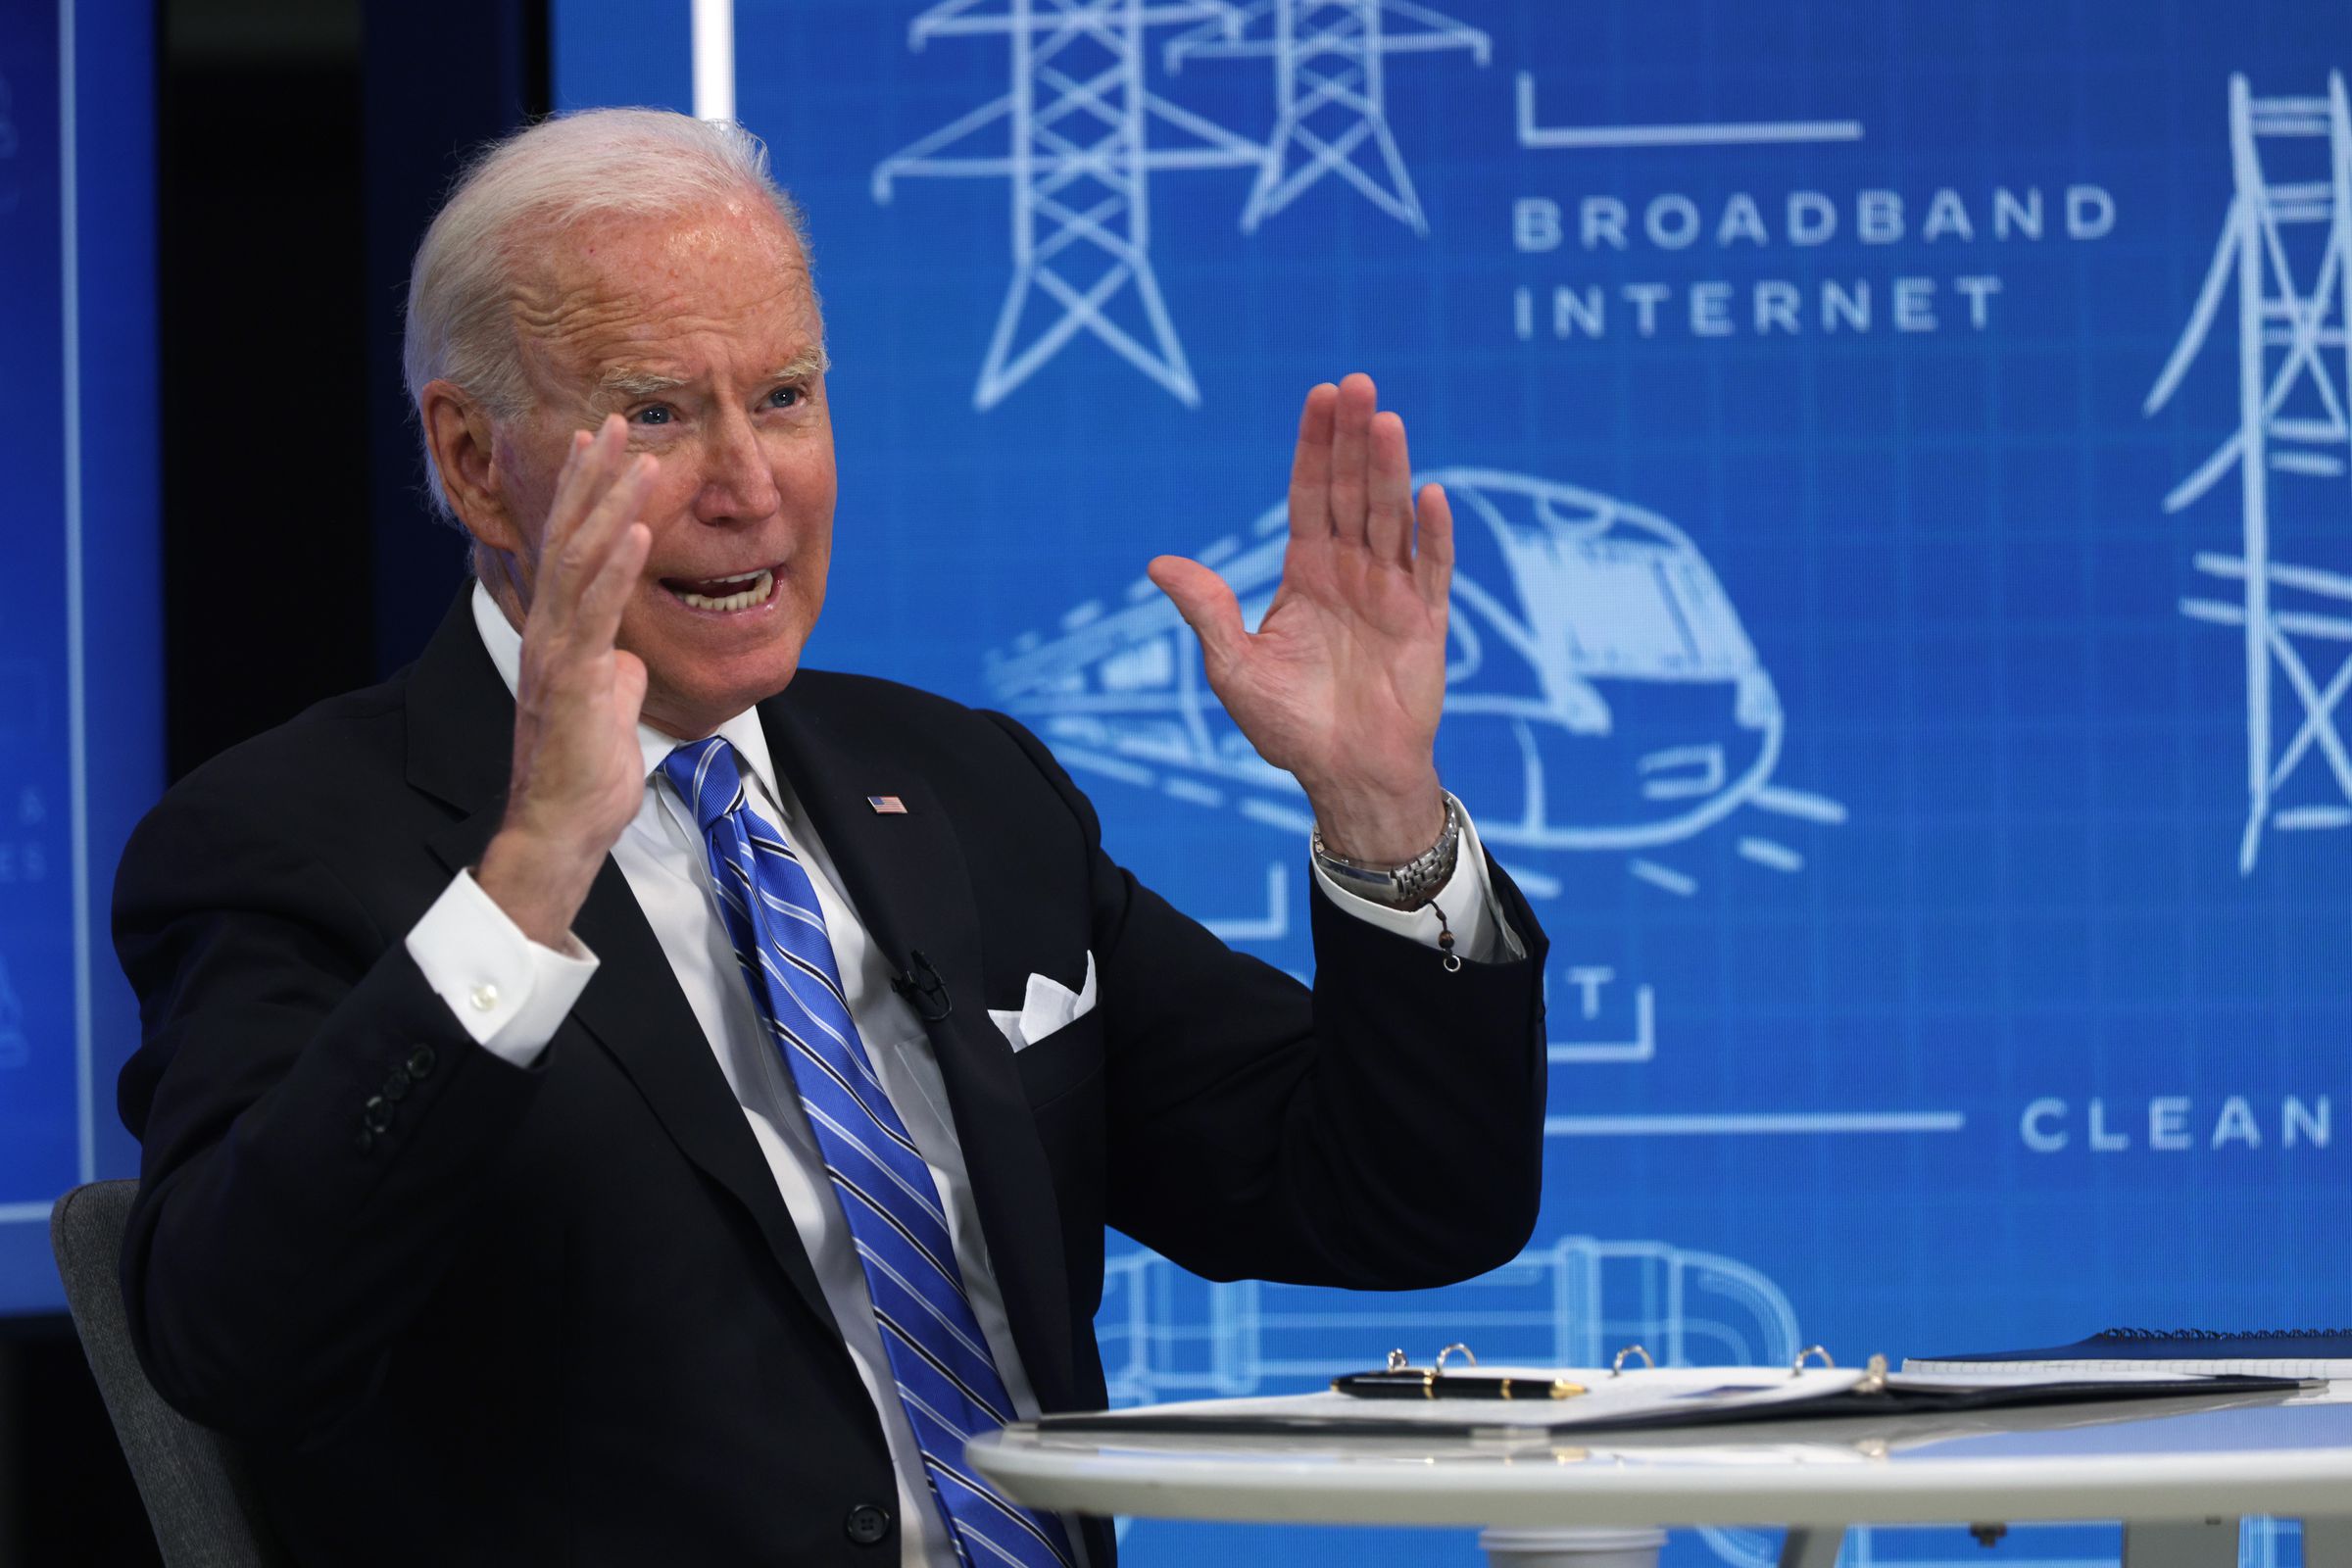 President Biden Virtually Meets With Local Officials To Discuss Infrastructure Investment